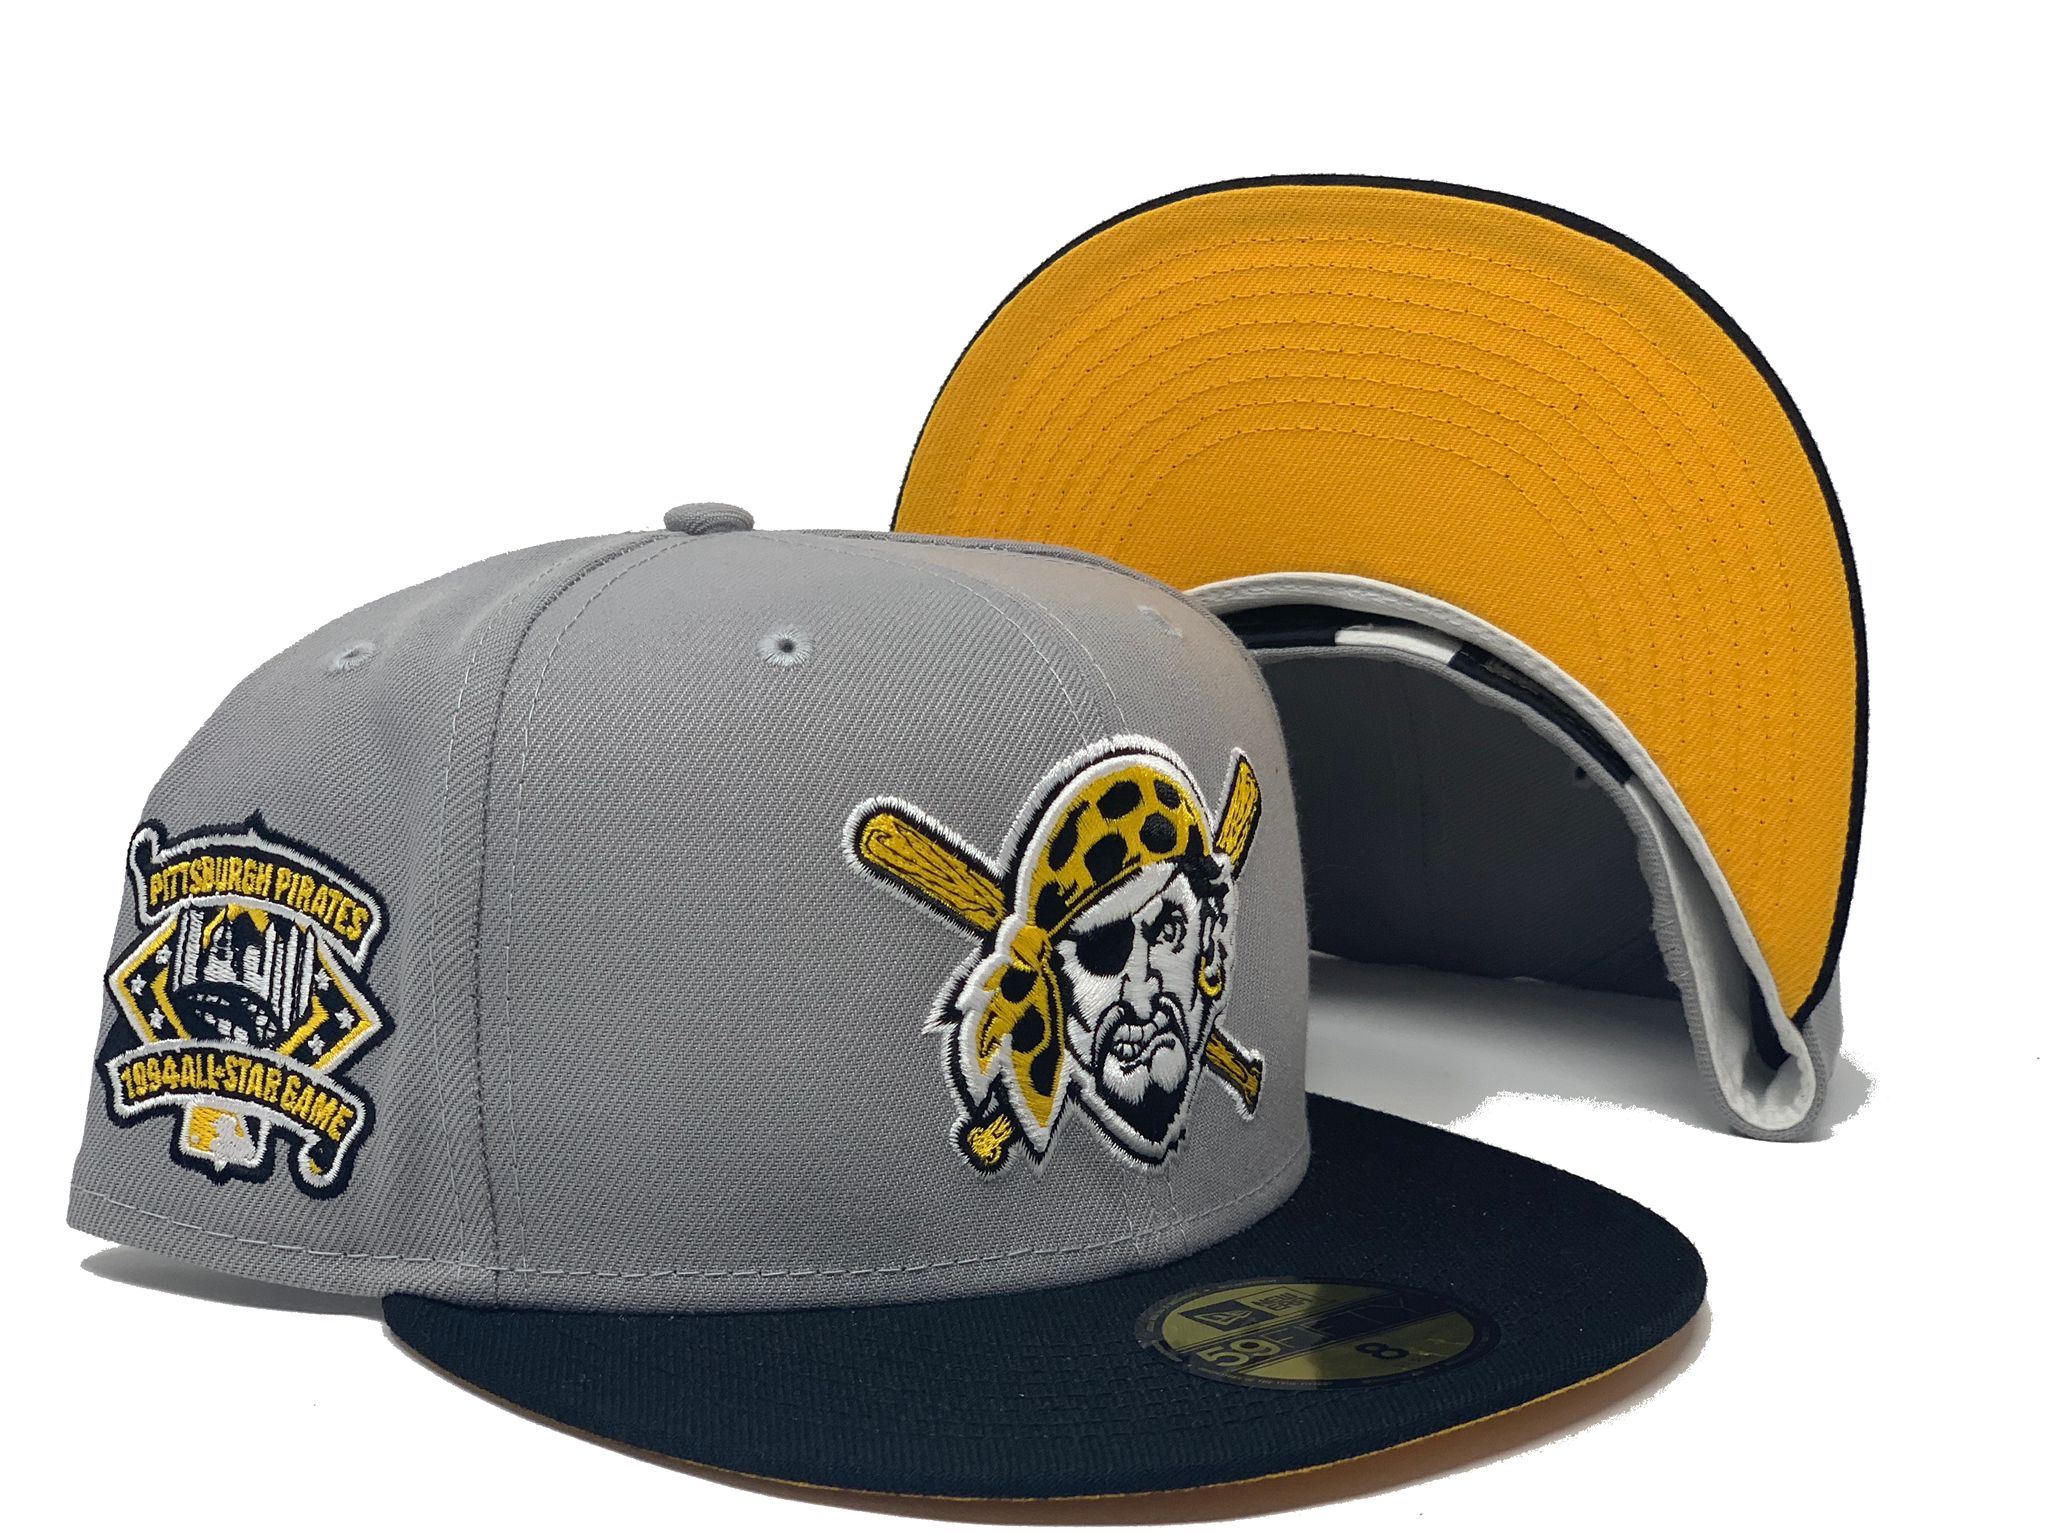 Pittsburgh Pirates New Era On Field Fitted Baseball Hat Size 7 Salute Troops